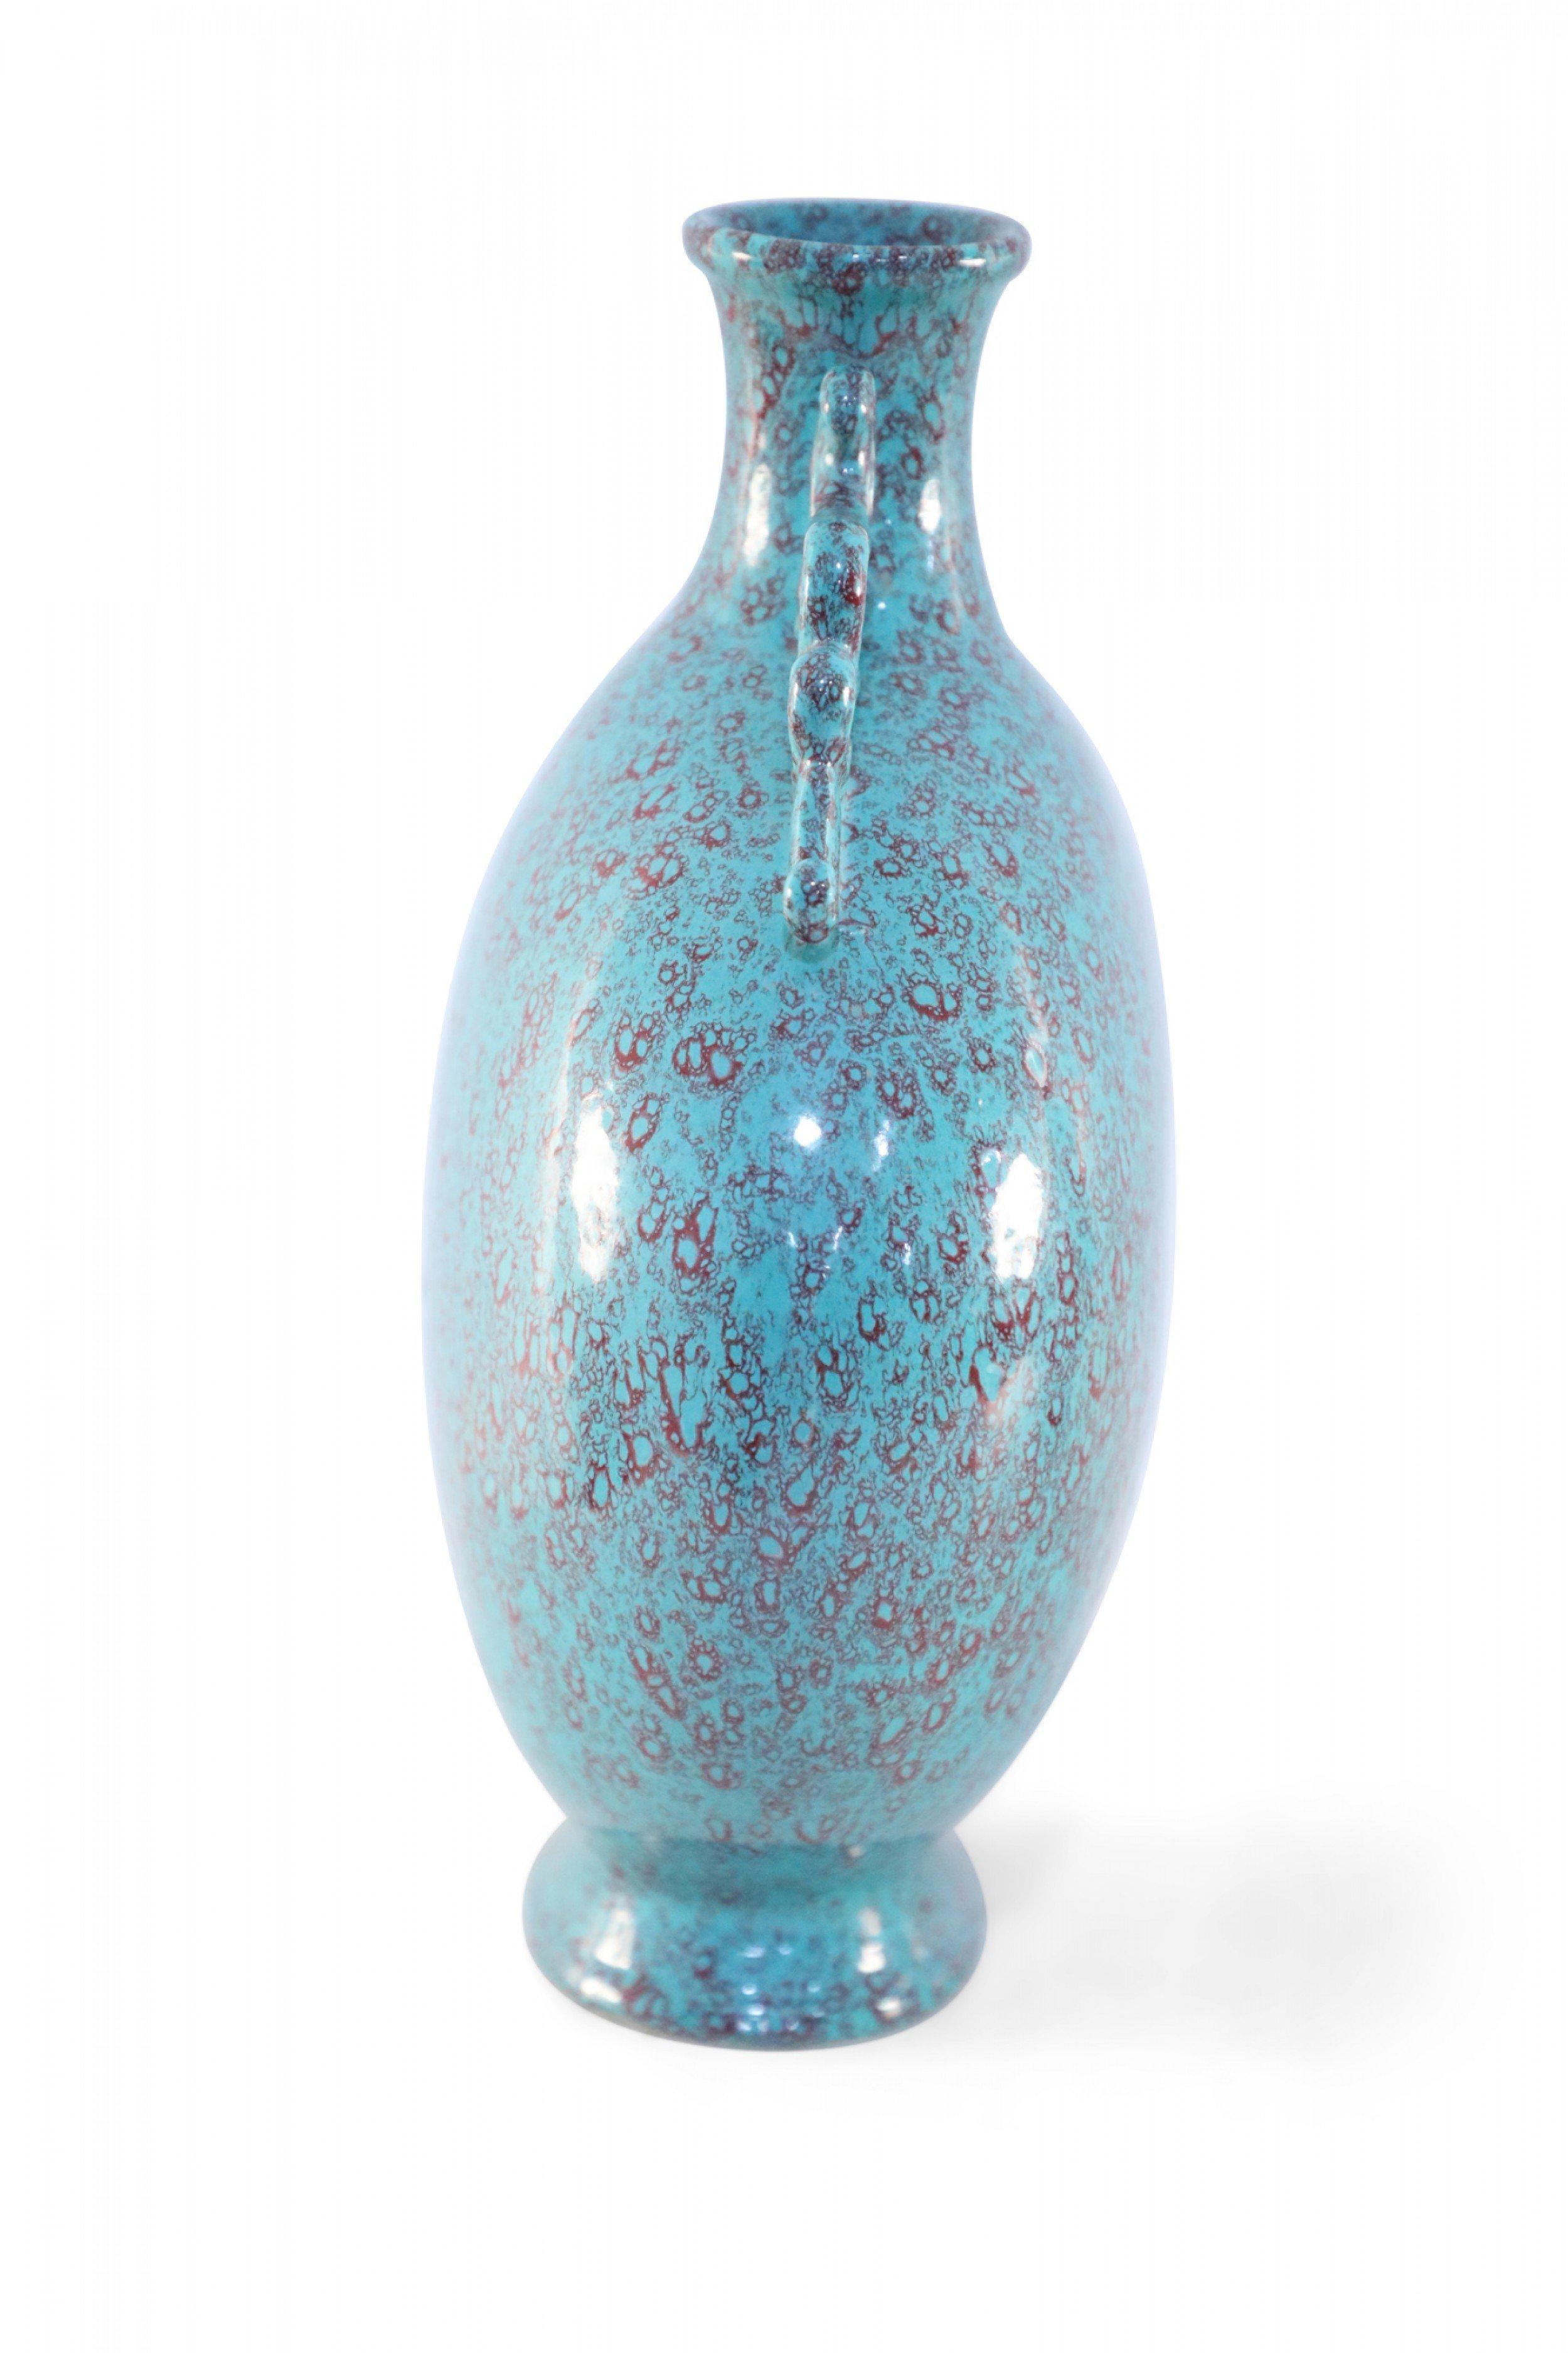 Chinese Export Chinese Teal and Red Crackle Porcelain Moon Flask Vase